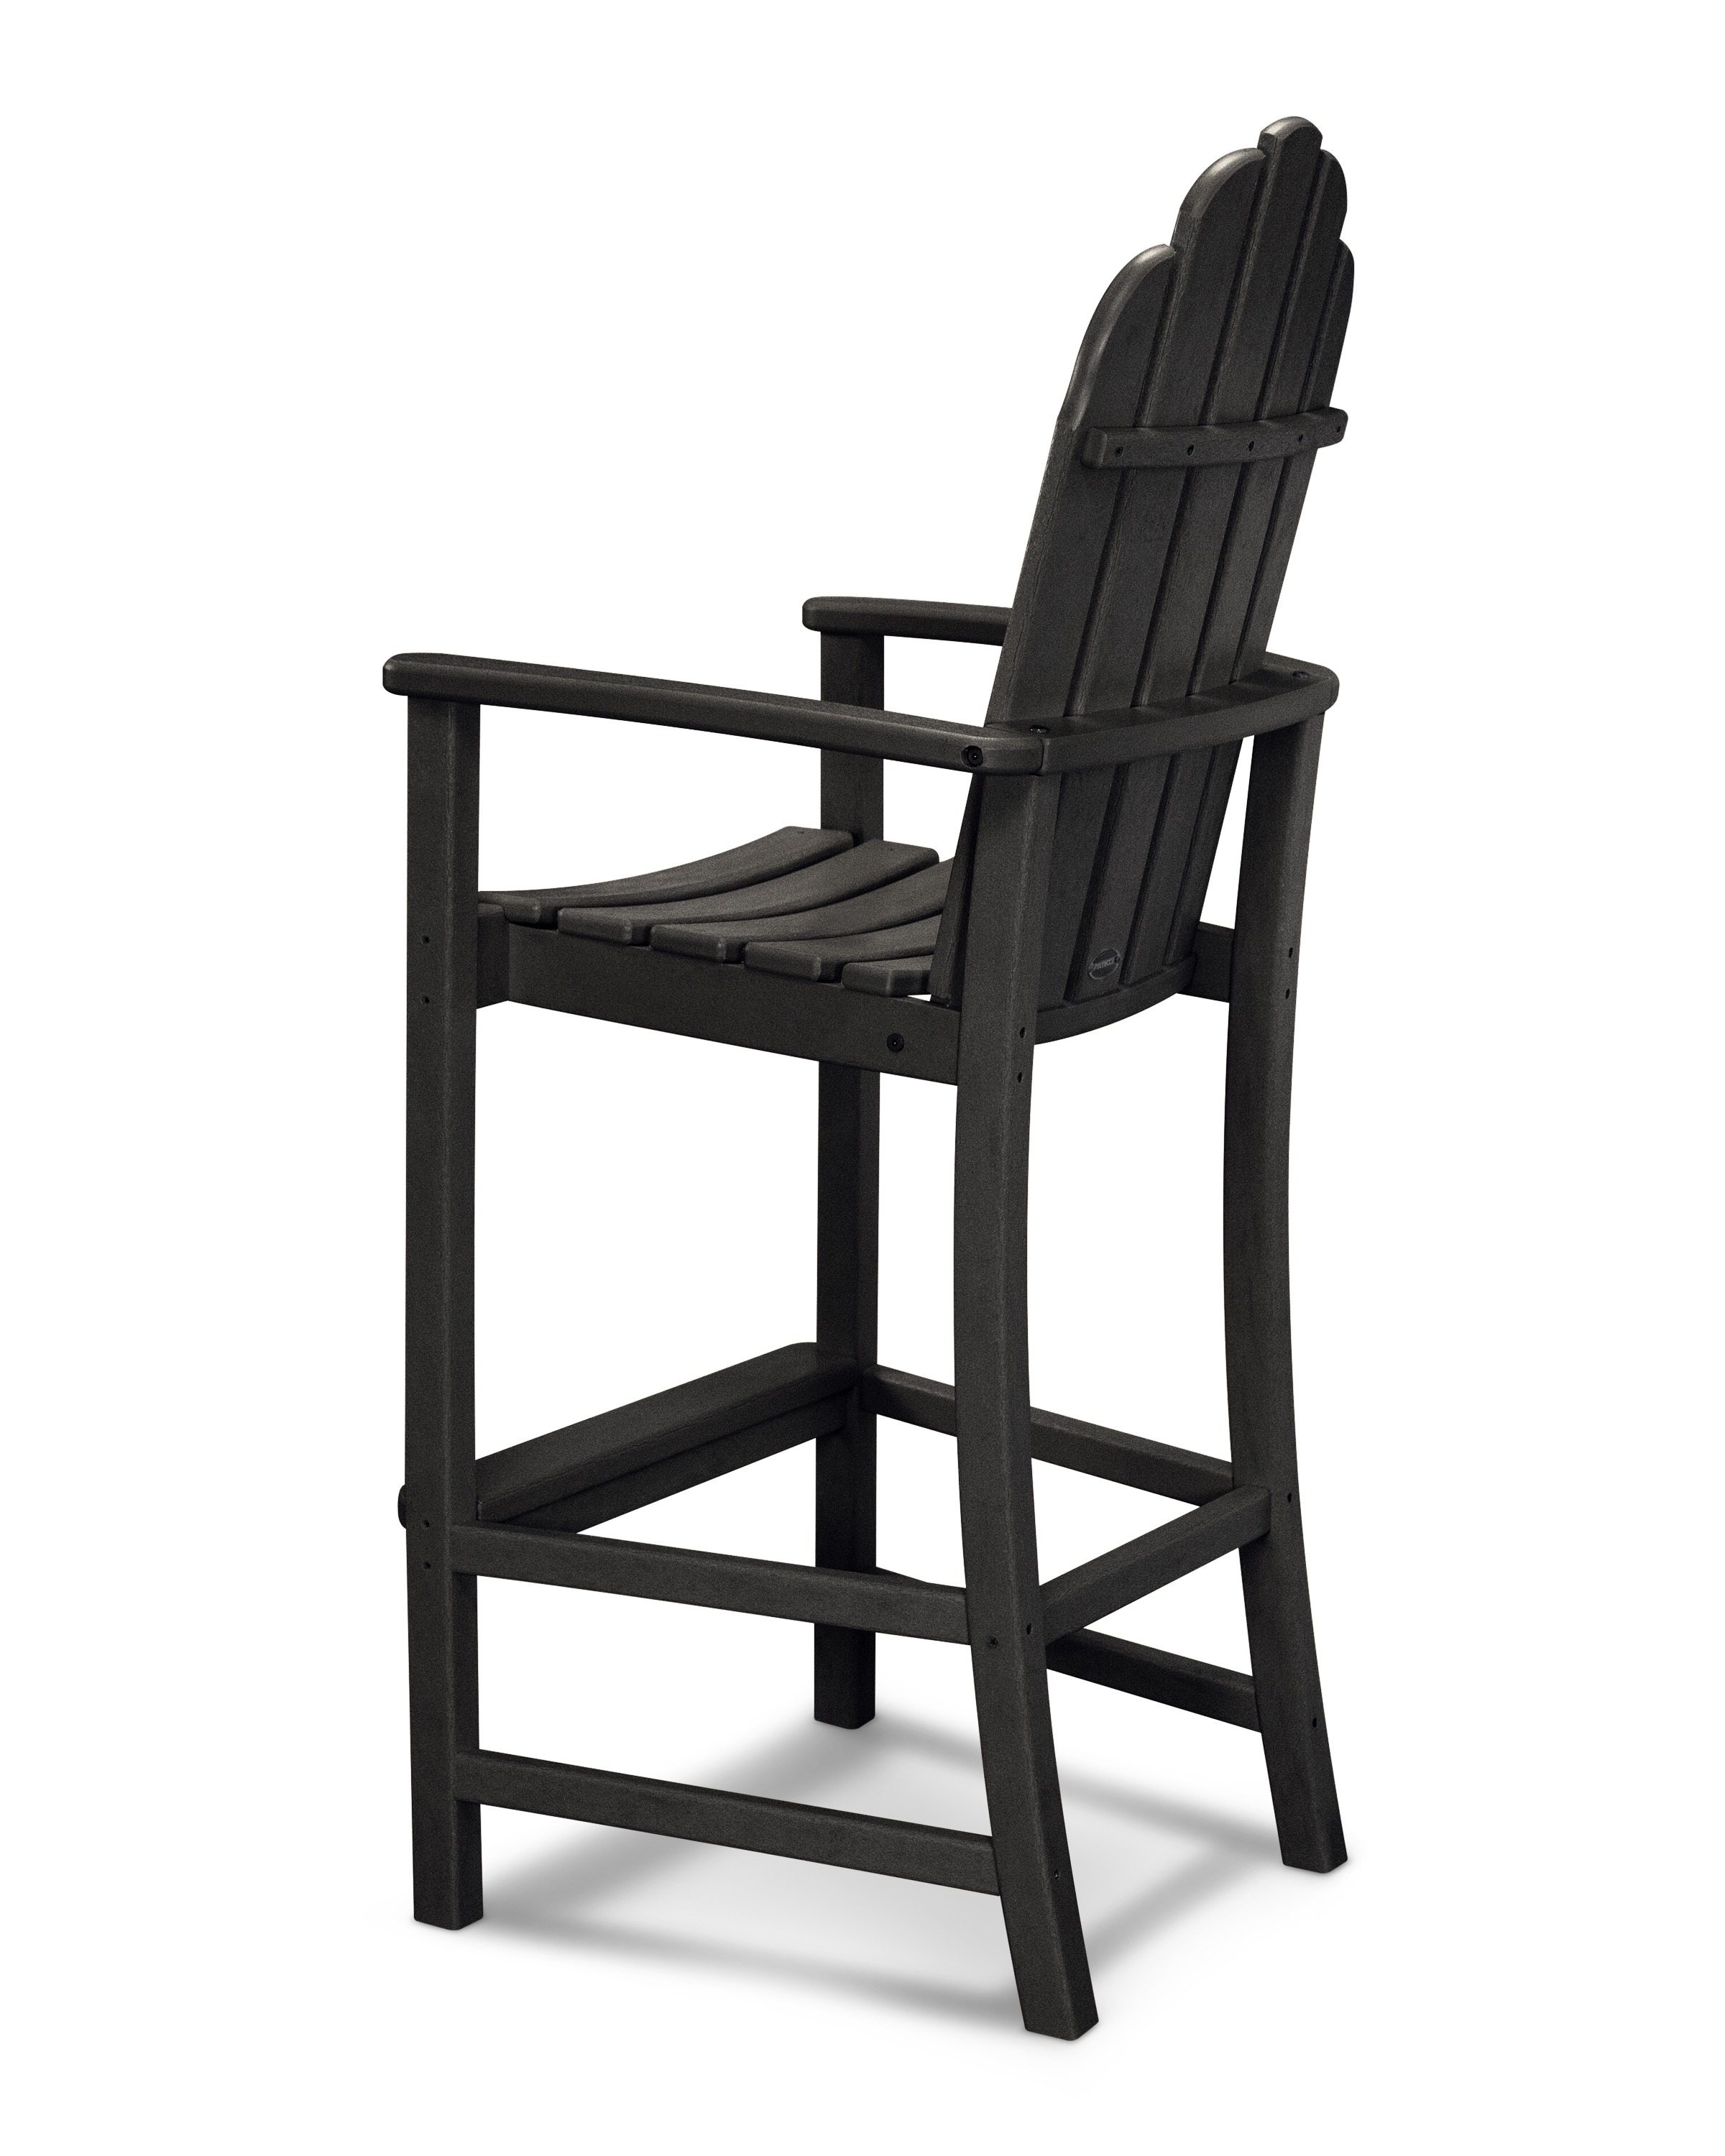 The Classic Adirondack Design Moves To New Heights With This Comfortable Bar Height Chair. Polywood Furniture Is Constructed Of Solid Polywood Lumber That